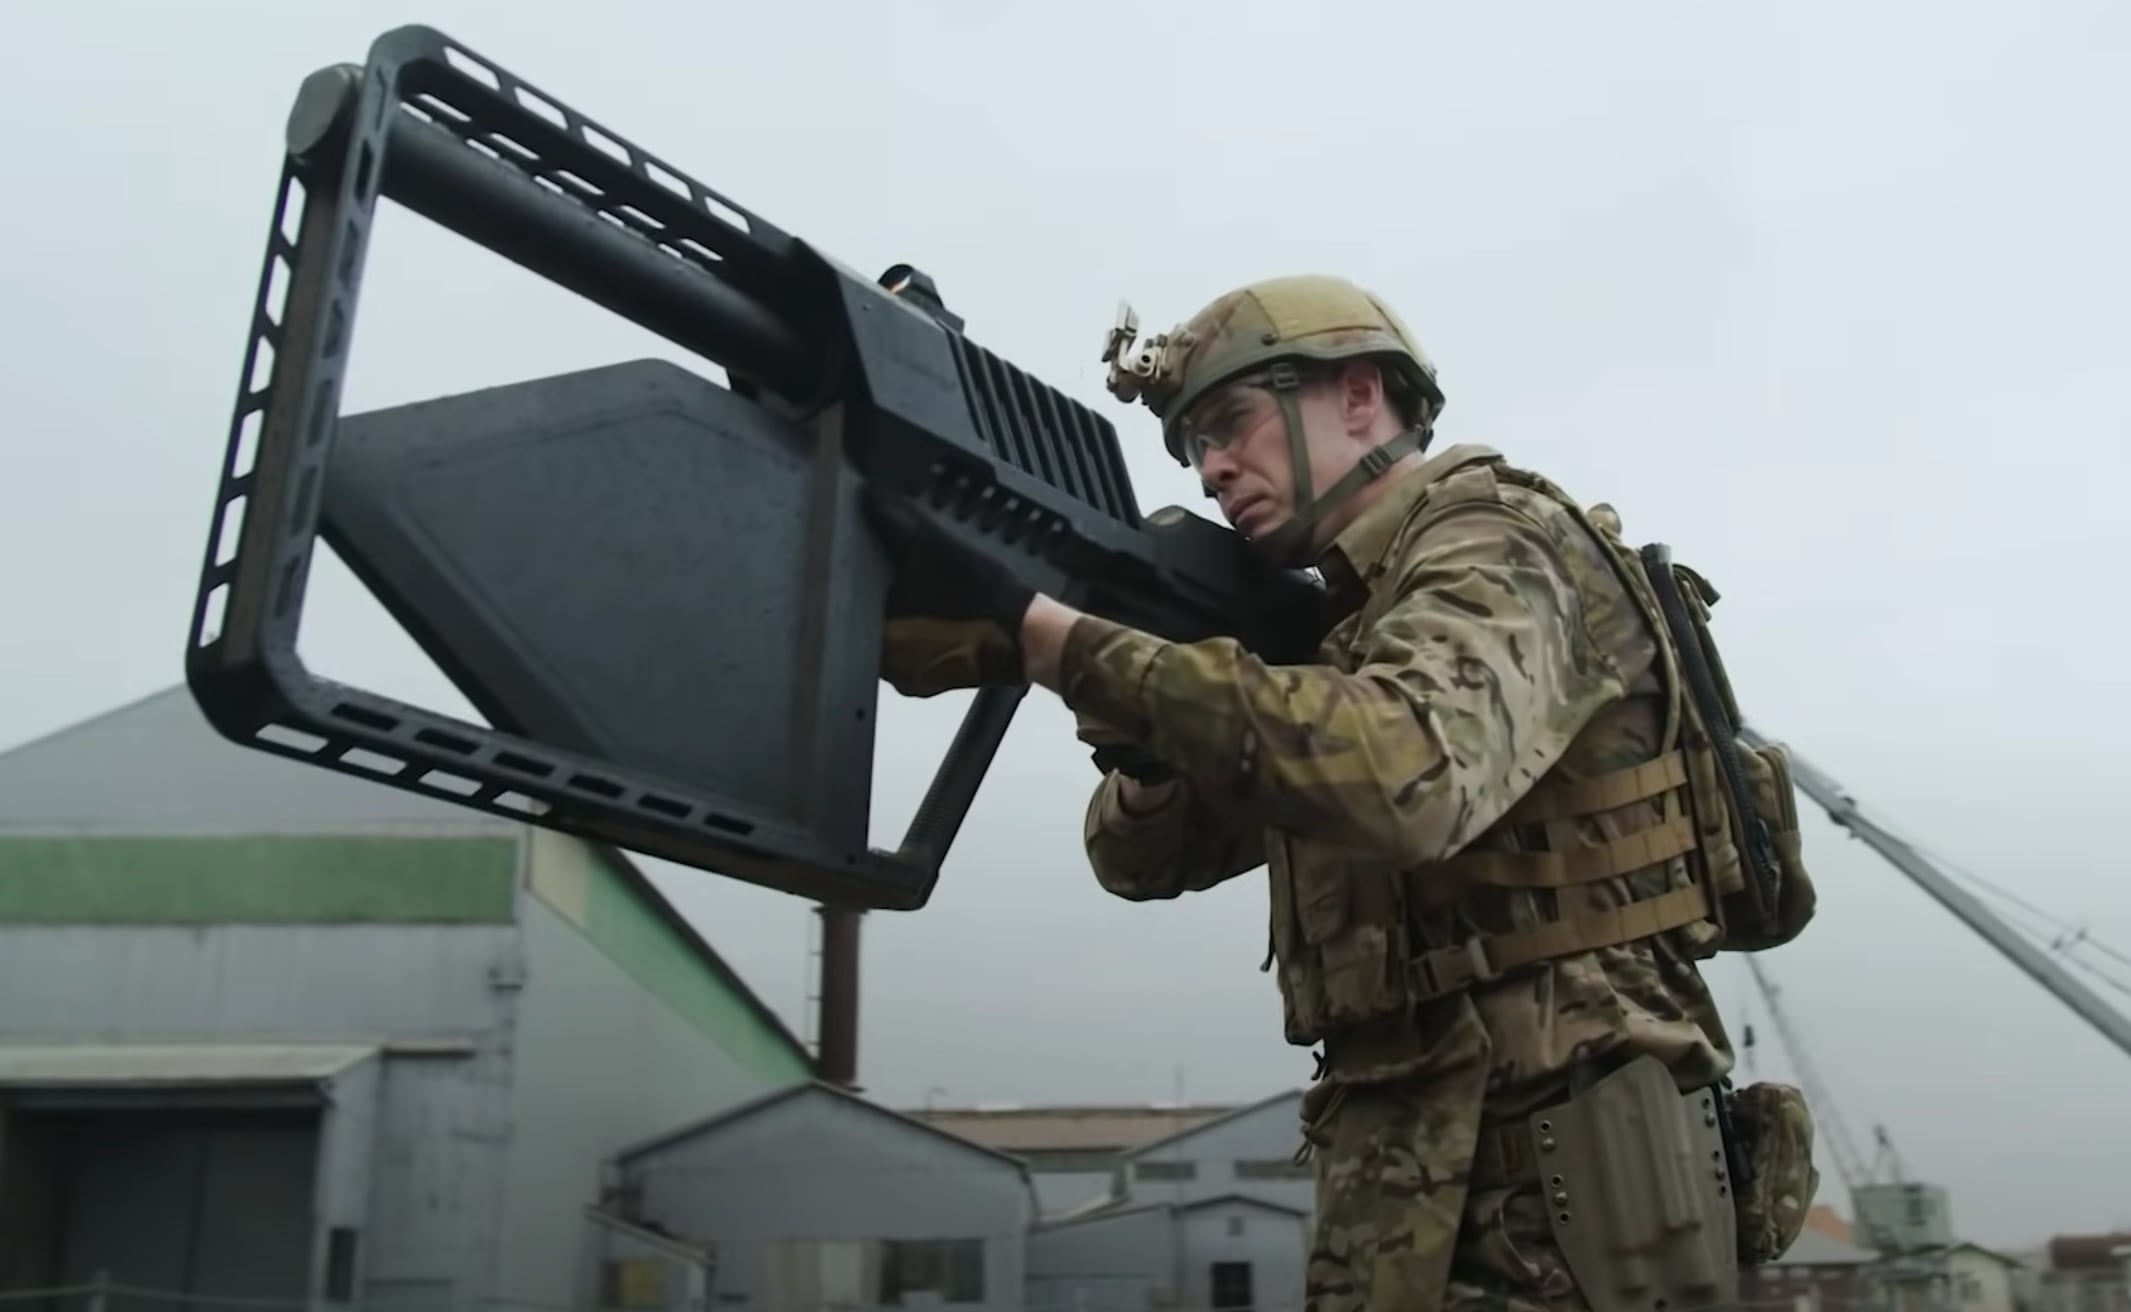 hundrede Erobrer støn This enormous drone gun can pluck UAVs right out of the sky